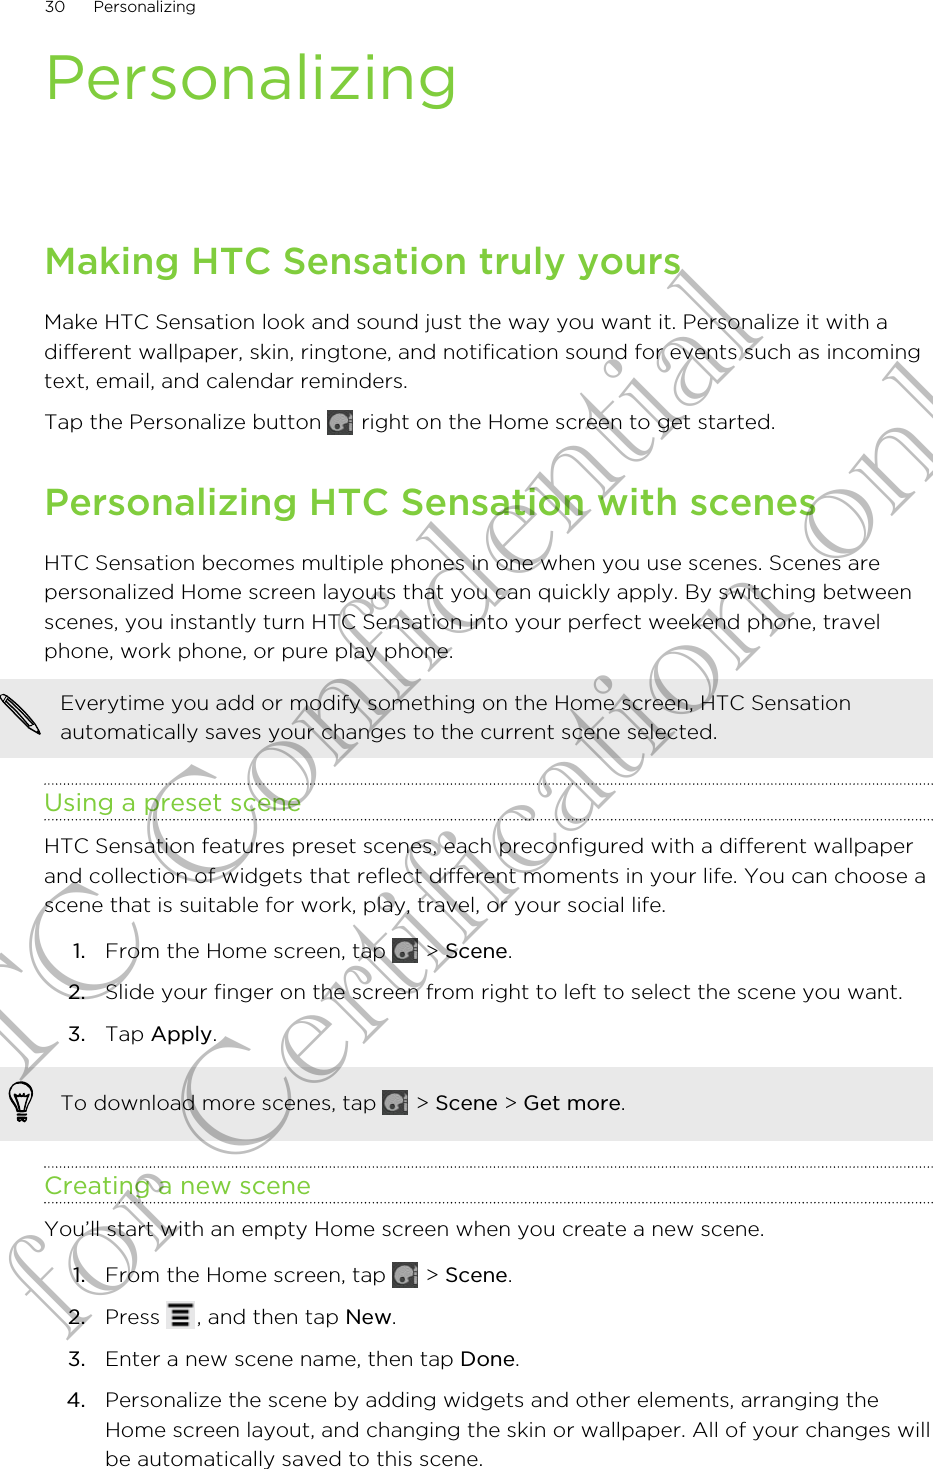 PersonalizingMaking HTC Sensation truly yoursMake HTC Sensation look and sound just the way you want it. Personalize it with adifferent wallpaper, skin, ringtone, and notification sound for events such as incomingtext, email, and calendar reminders.Tap the Personalize button   right on the Home screen to get started.Personalizing HTC Sensation with scenesHTC Sensation becomes multiple phones in one when you use scenes. Scenes arepersonalized Home screen layouts that you can quickly apply. By switching betweenscenes, you instantly turn HTC Sensation into your perfect weekend phone, travelphone, work phone, or pure play phone.Everytime you add or modify something on the Home screen, HTC Sensationautomatically saves your changes to the current scene selected.Using a preset sceneHTC Sensation features preset scenes, each preconfigured with a different wallpaperand collection of widgets that reflect different moments in your life. You can choose ascene that is suitable for work, play, travel, or your social life.1. From the Home screen, tap   &gt; Scene.2. Slide your finger on the screen from right to left to select the scene you want.3. Tap Apply.To download more scenes, tap   &gt; Scene &gt; Get more.Creating a new sceneYou’ll start with an empty Home screen when you create a new scene.1. From the Home screen, tap   &gt; Scene.2. Press  , and then tap New.3. Enter a new scene name, then tap Done.4. Personalize the scene by adding widgets and other elements, arranging theHome screen layout, and changing the skin or wallpaper. All of your changes willbe automatically saved to this scene.30 PersonalizingHTC Confidential for Certification only